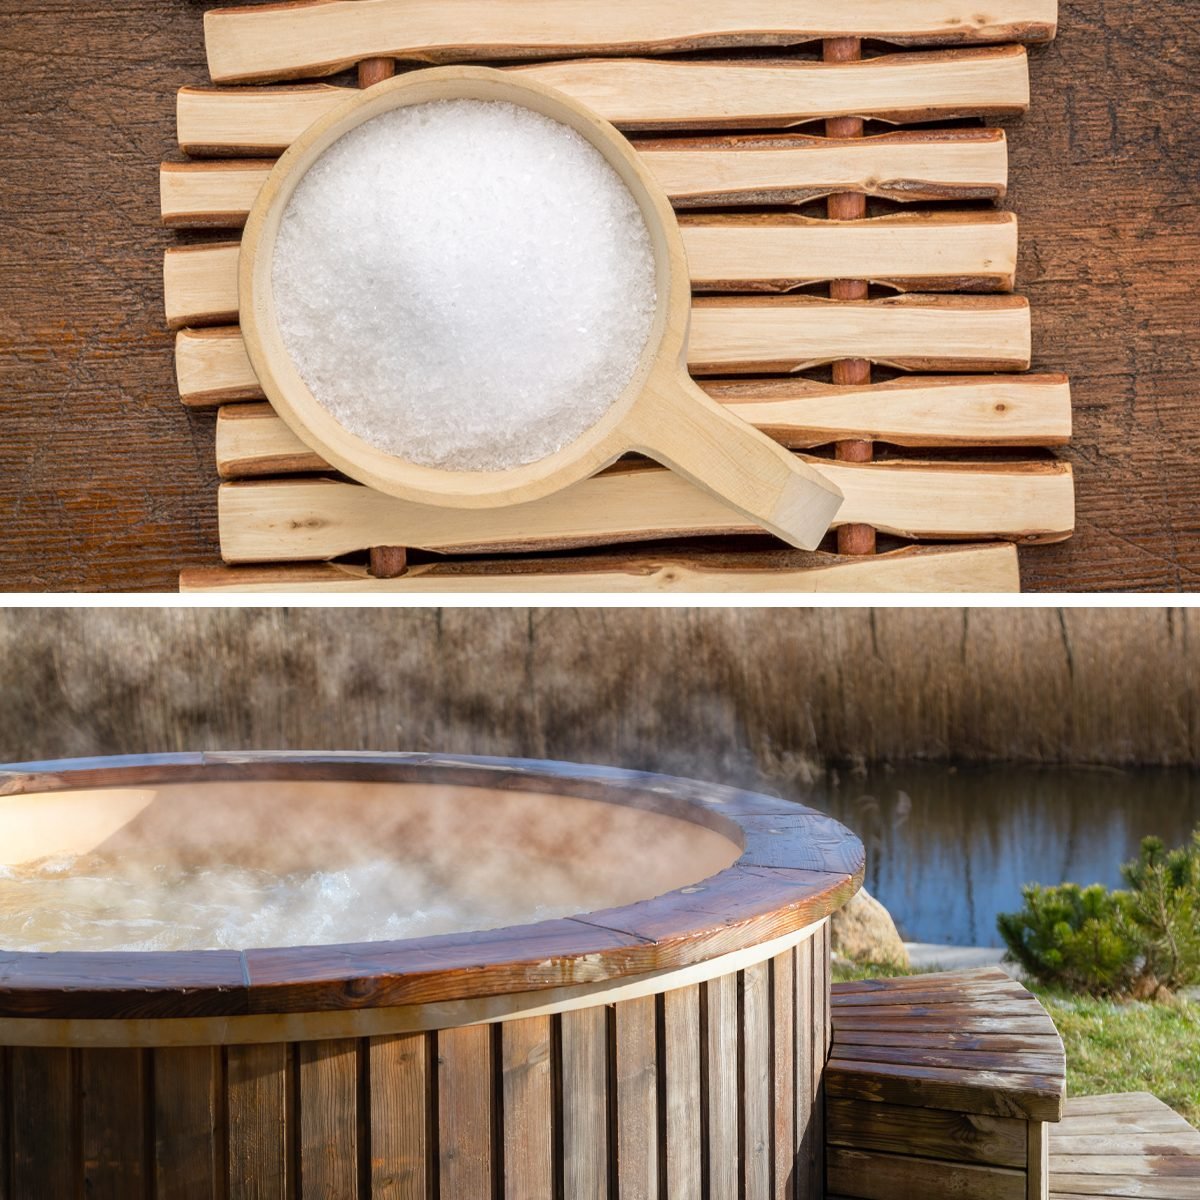 Can You Put Epsom Salt in a Hot Tub?